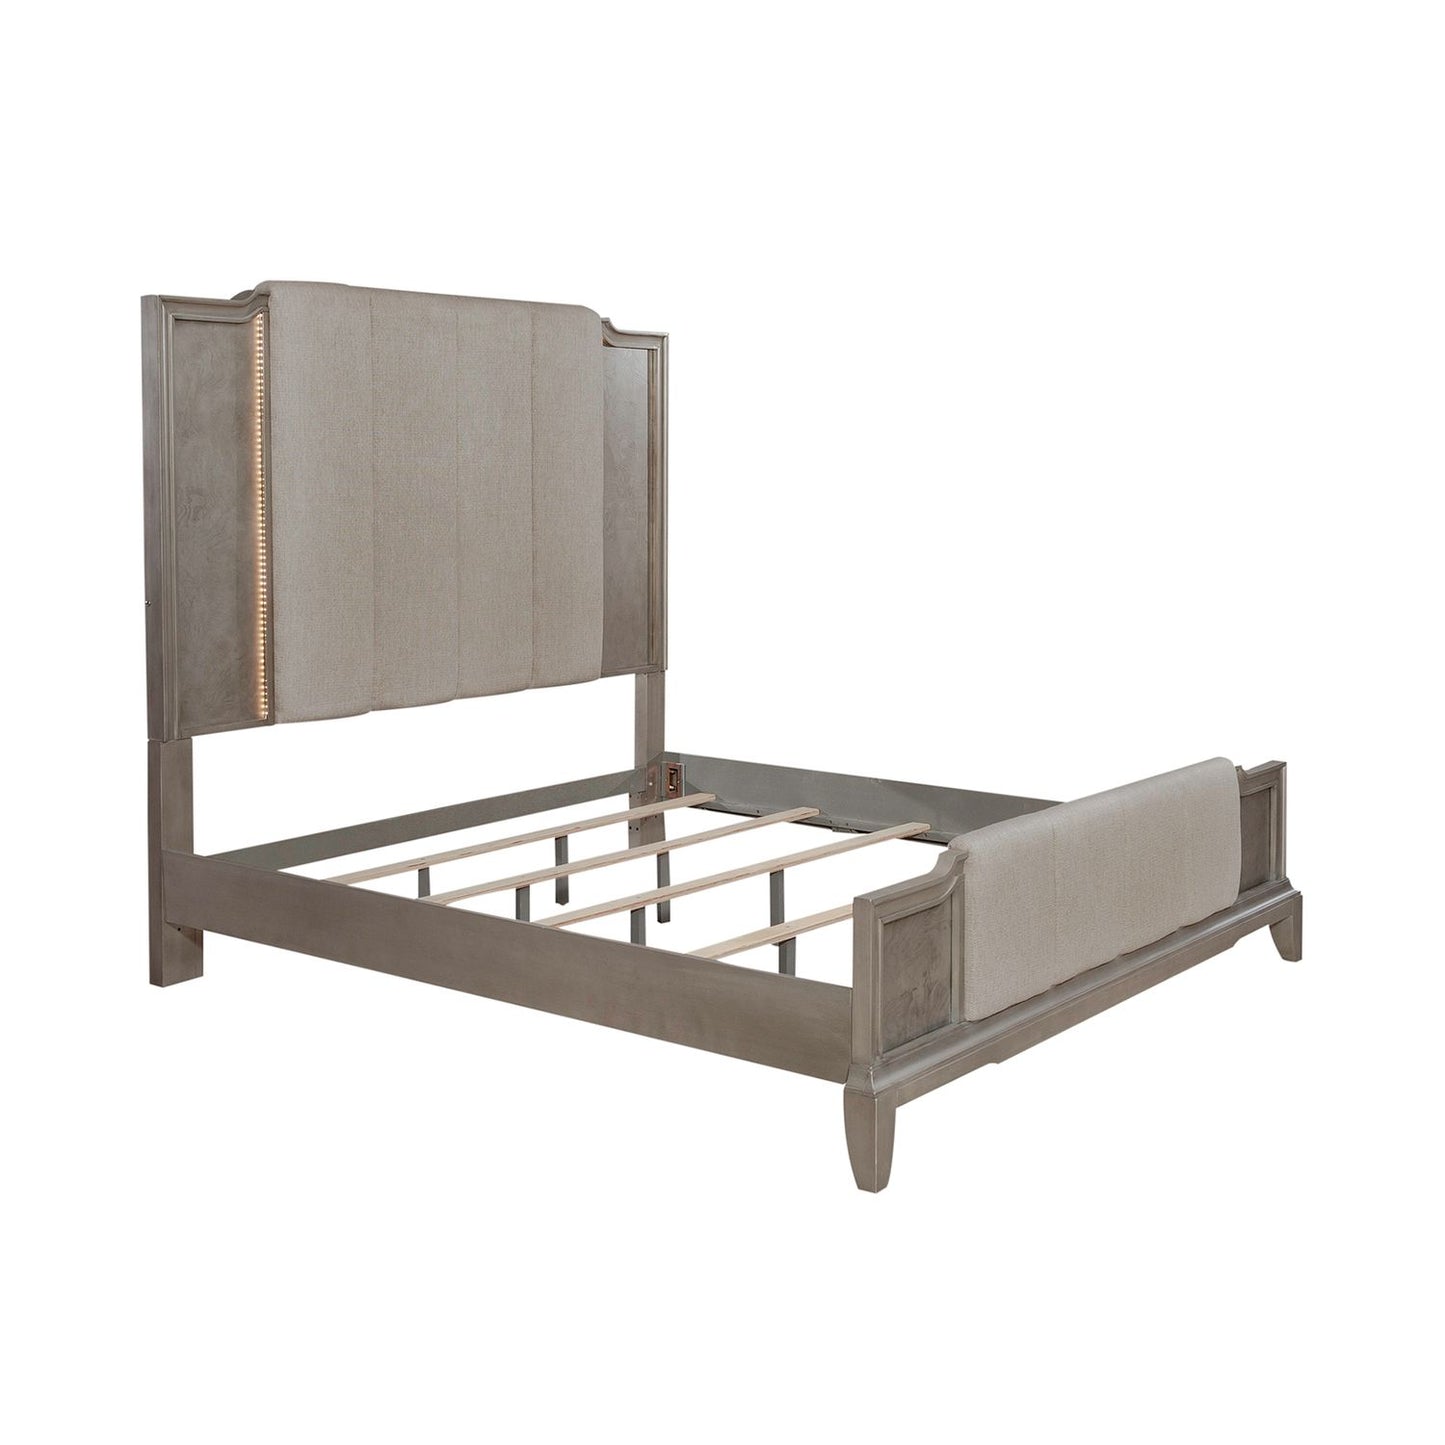 Montage - King California Upholstered Bed, Dresser & Mirror, Night Stand